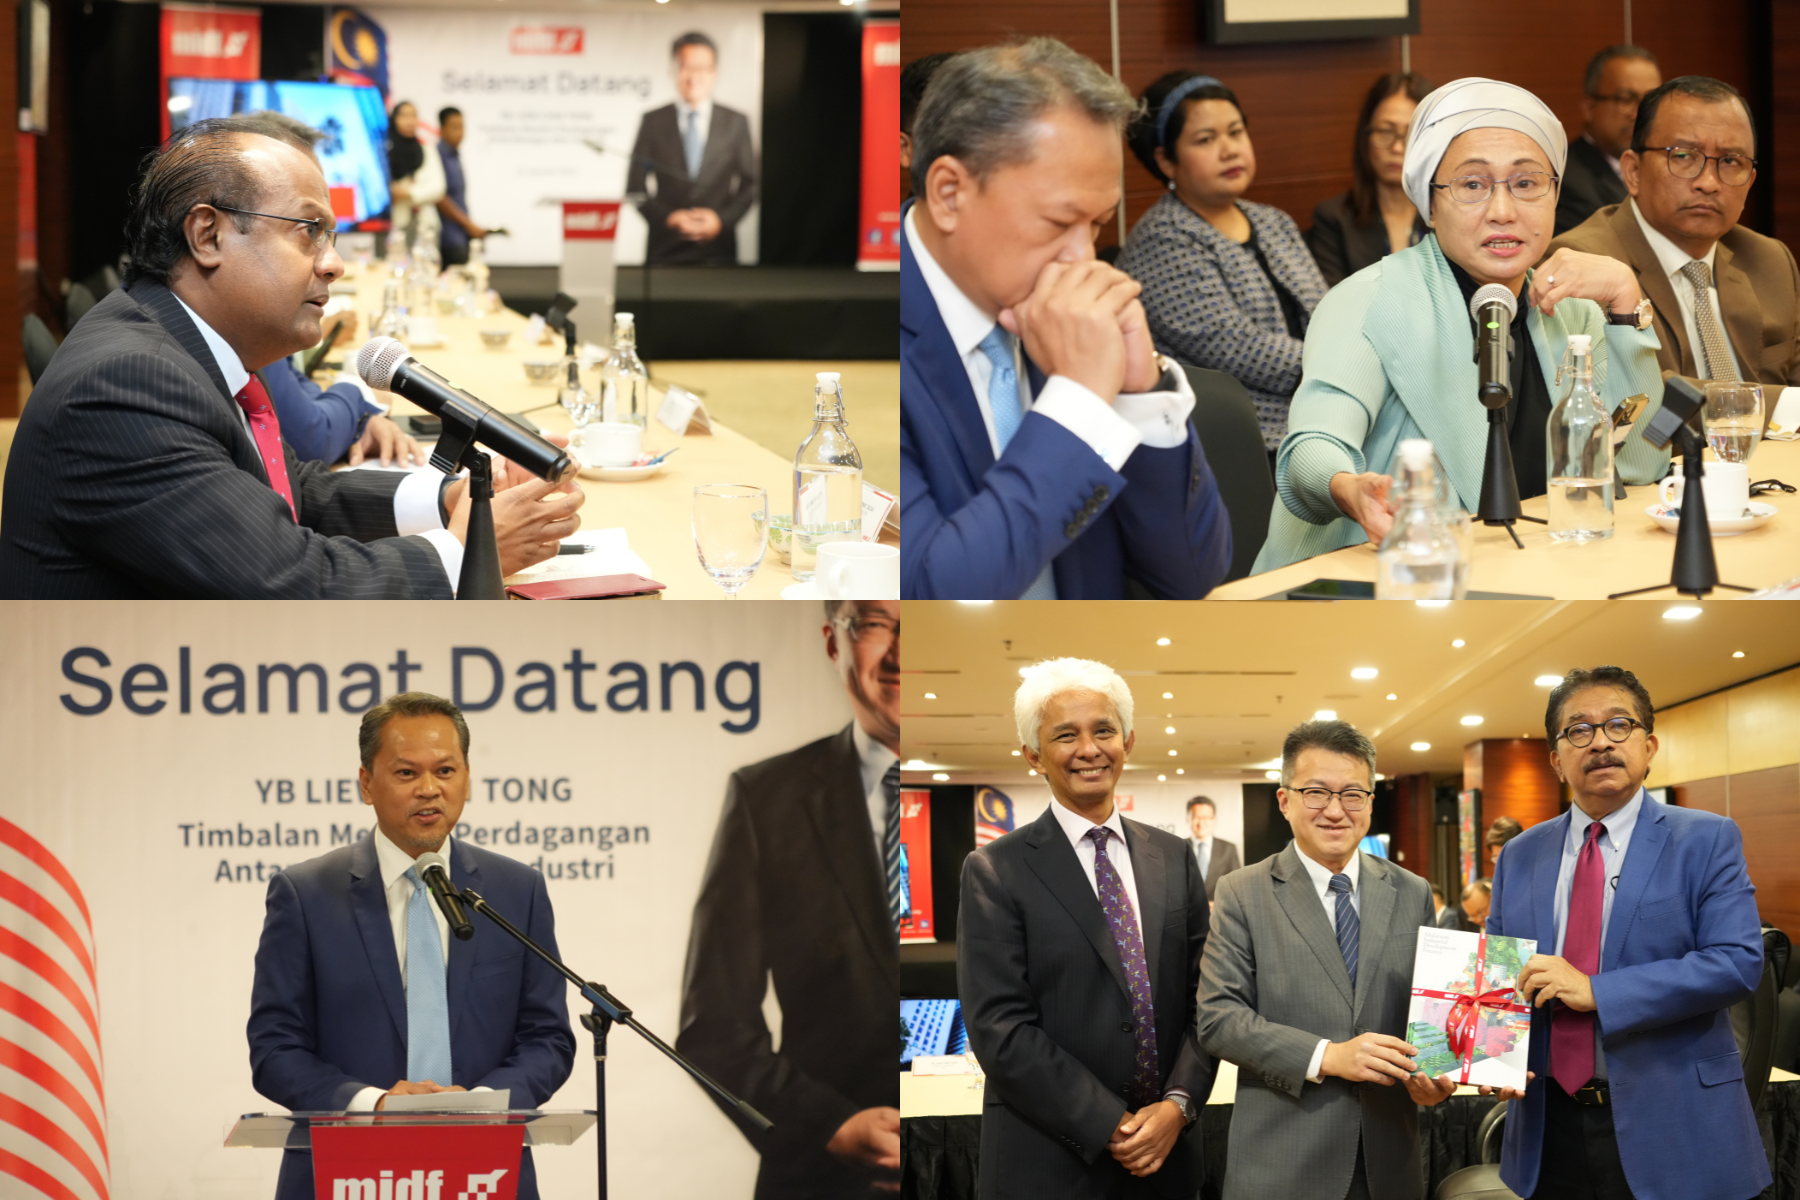 collage (clockwise) - Datuk Dominic, CEO of MIDF Investment Bank giving a speech - En. Azizi Mustafa, Head of Development Frnance Division and Datuk Yasmin, one of our Board members listening in - En. Azizi Mustafa giving a speech - MIDF Group MD & Chairman with Deputy Minister of MITI YB Liew